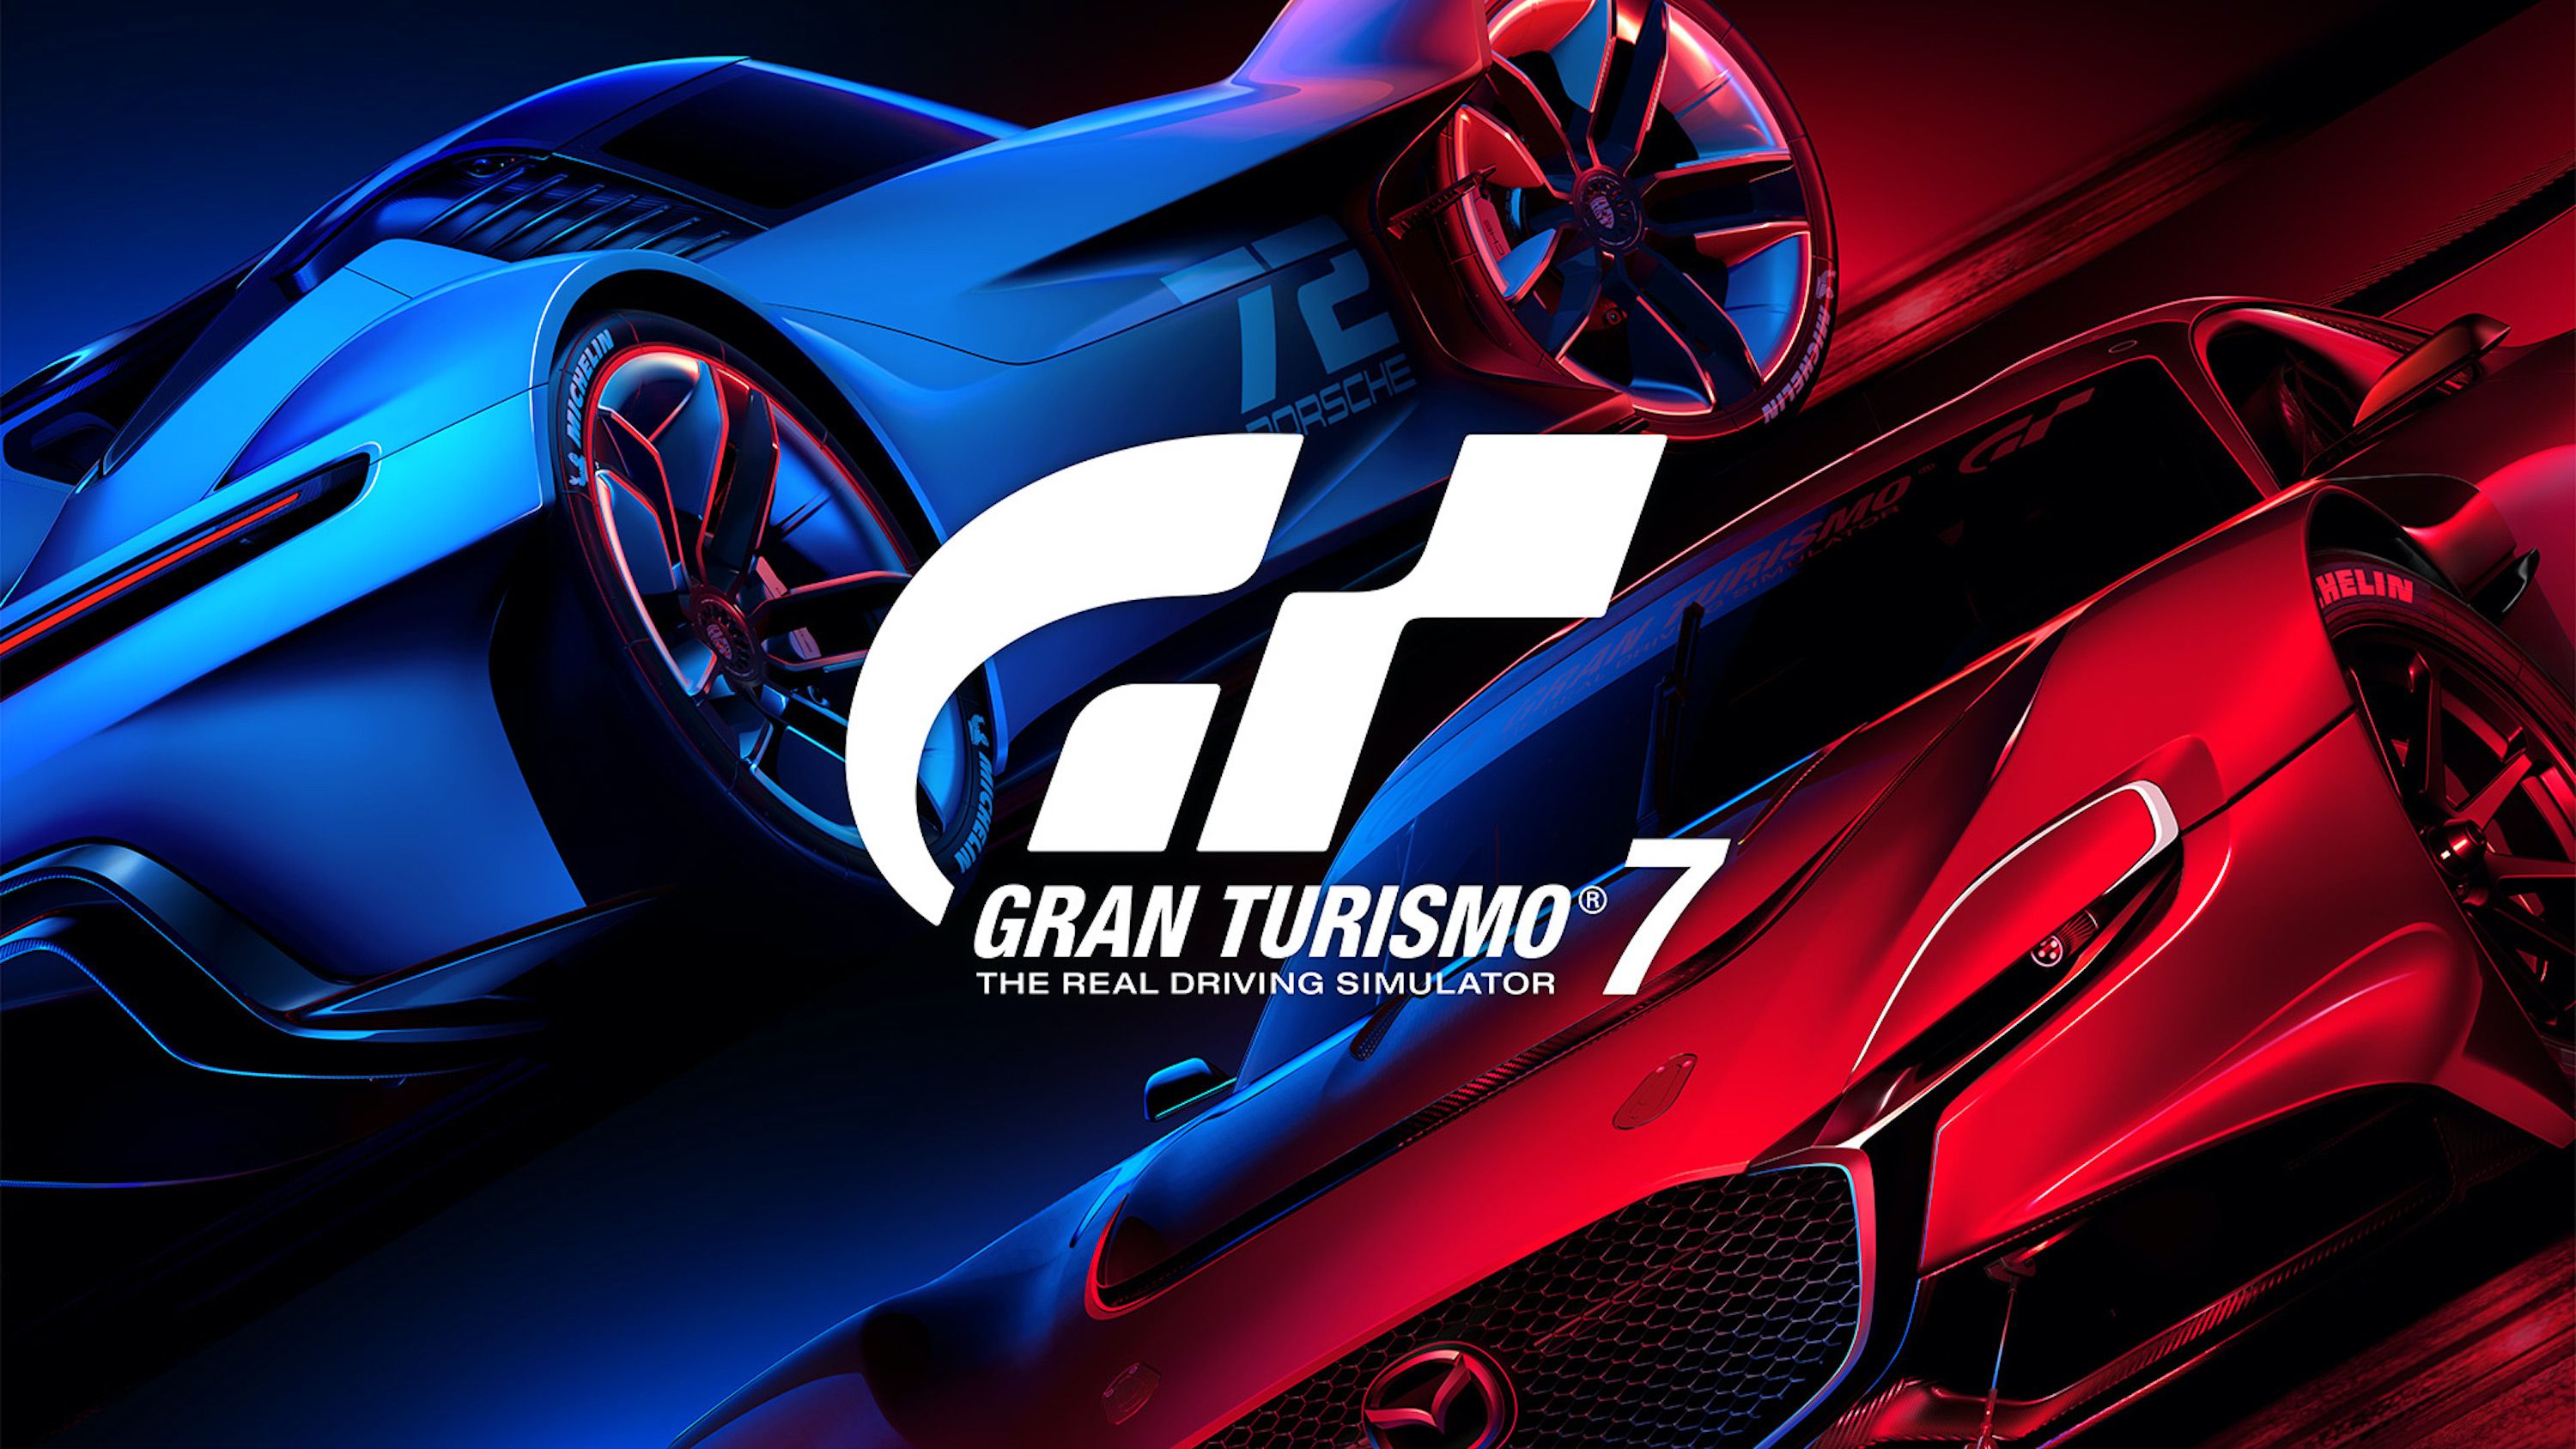 Gran Turismo 7 Will Arrive on March 4, collection ford gran turismo 7 